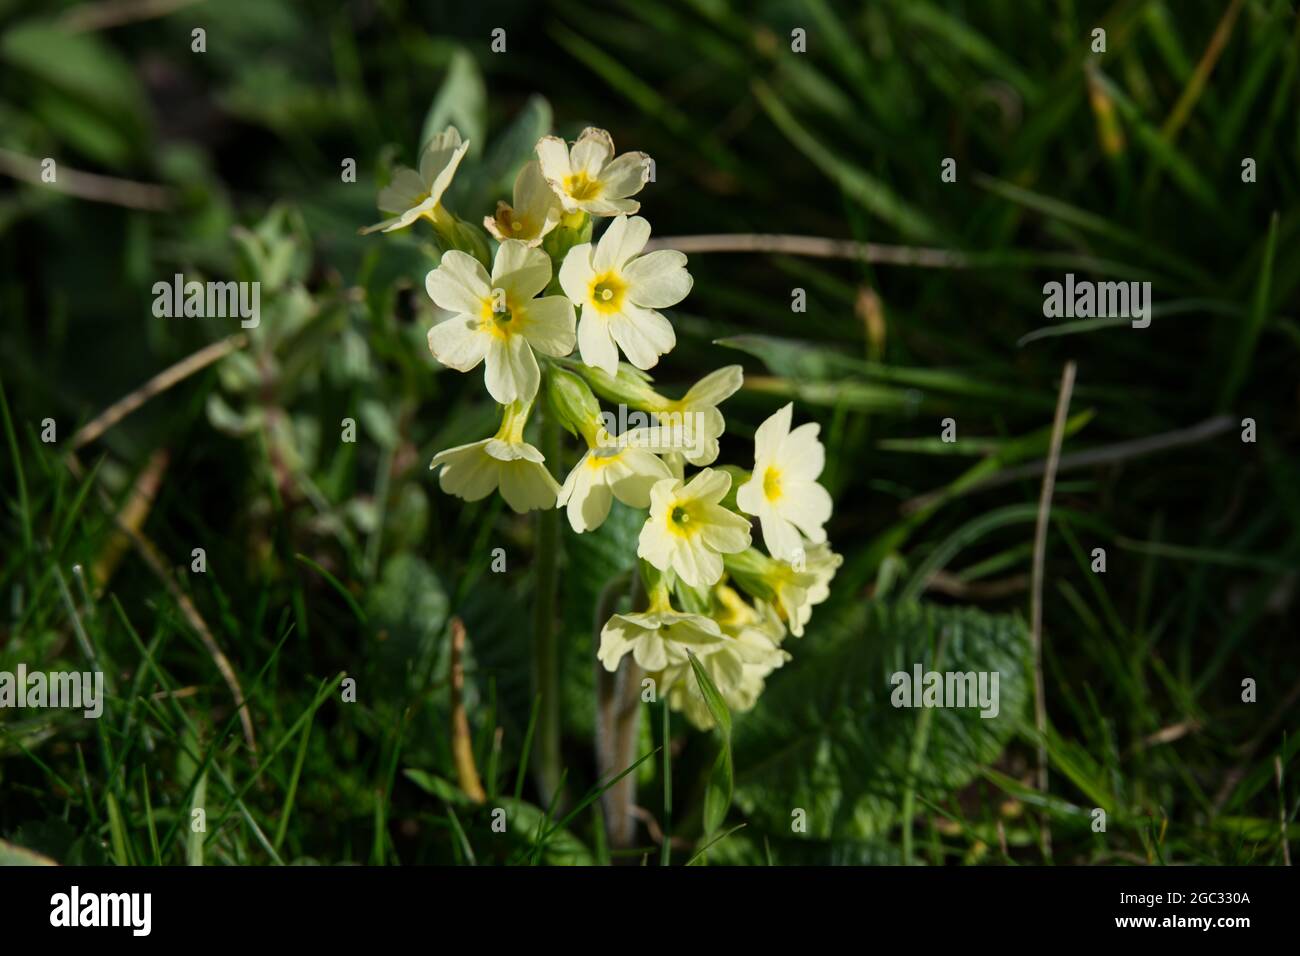 Pale yellow British wild spring flower Primula elatior Oxlip growing in grass March UK Stock Photo